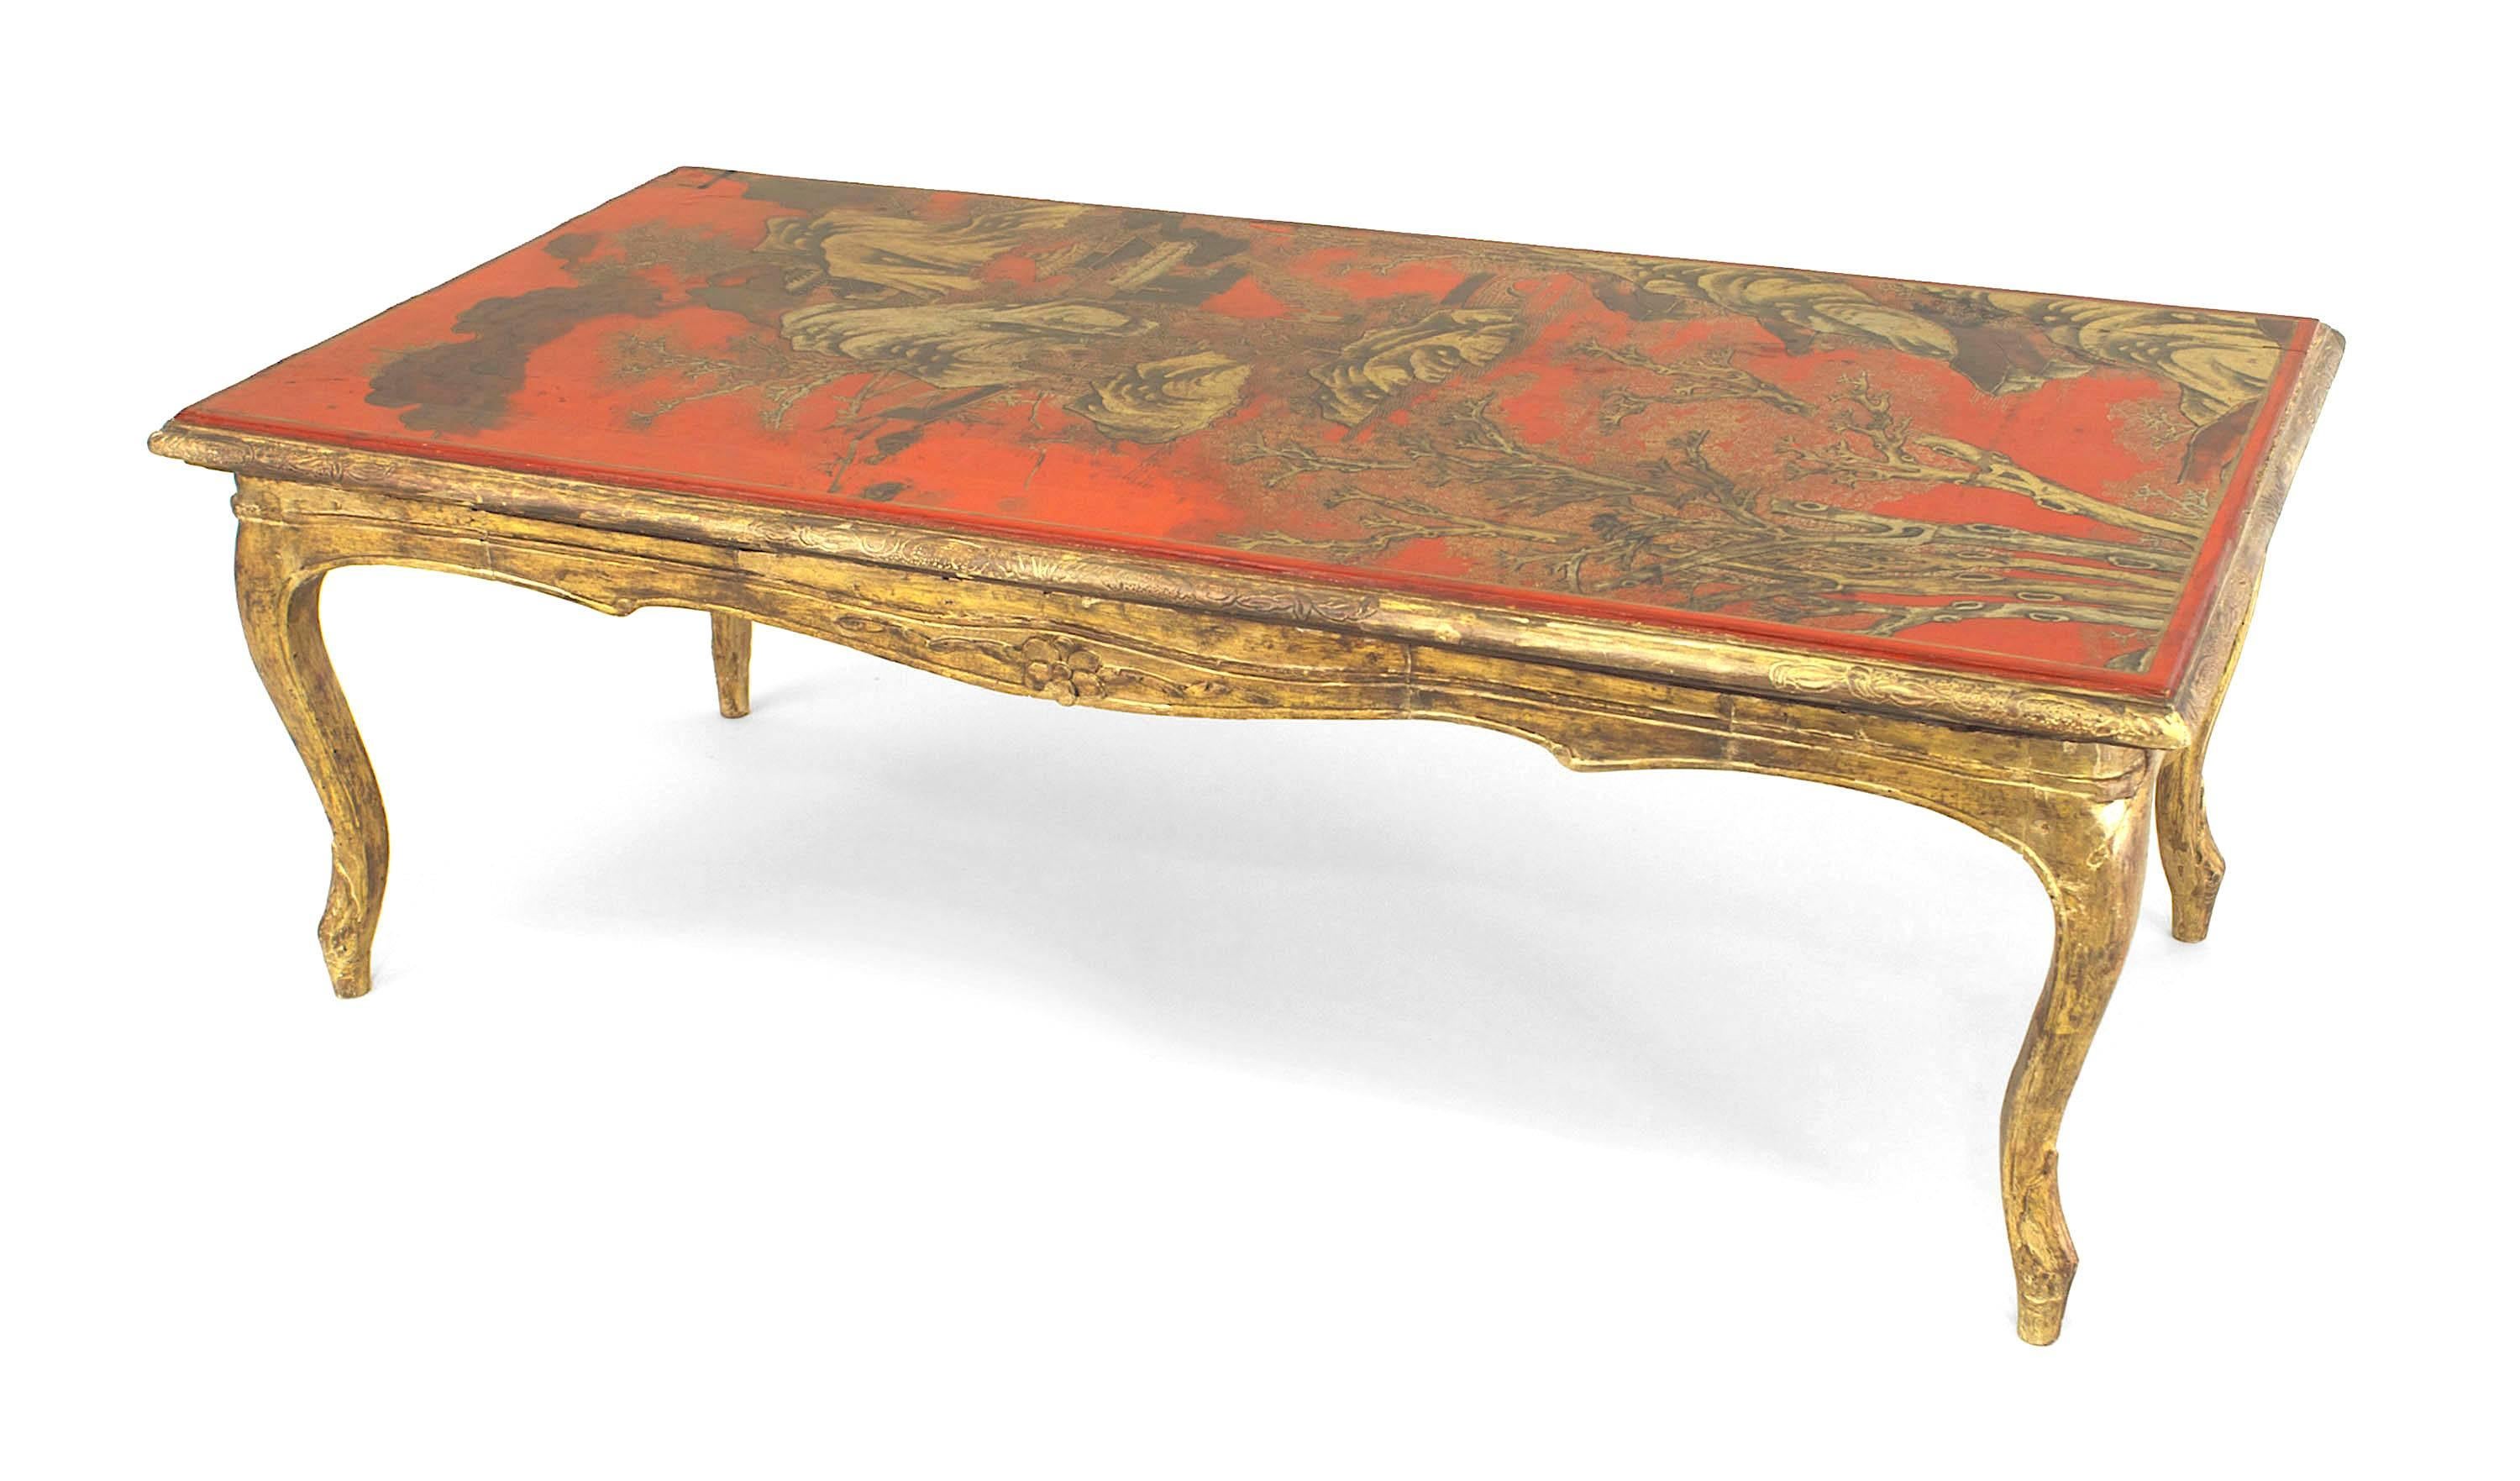 French Louis XV style giltwood base rectangular coffee table supporting a red lacquered chinoiserie decorated top.